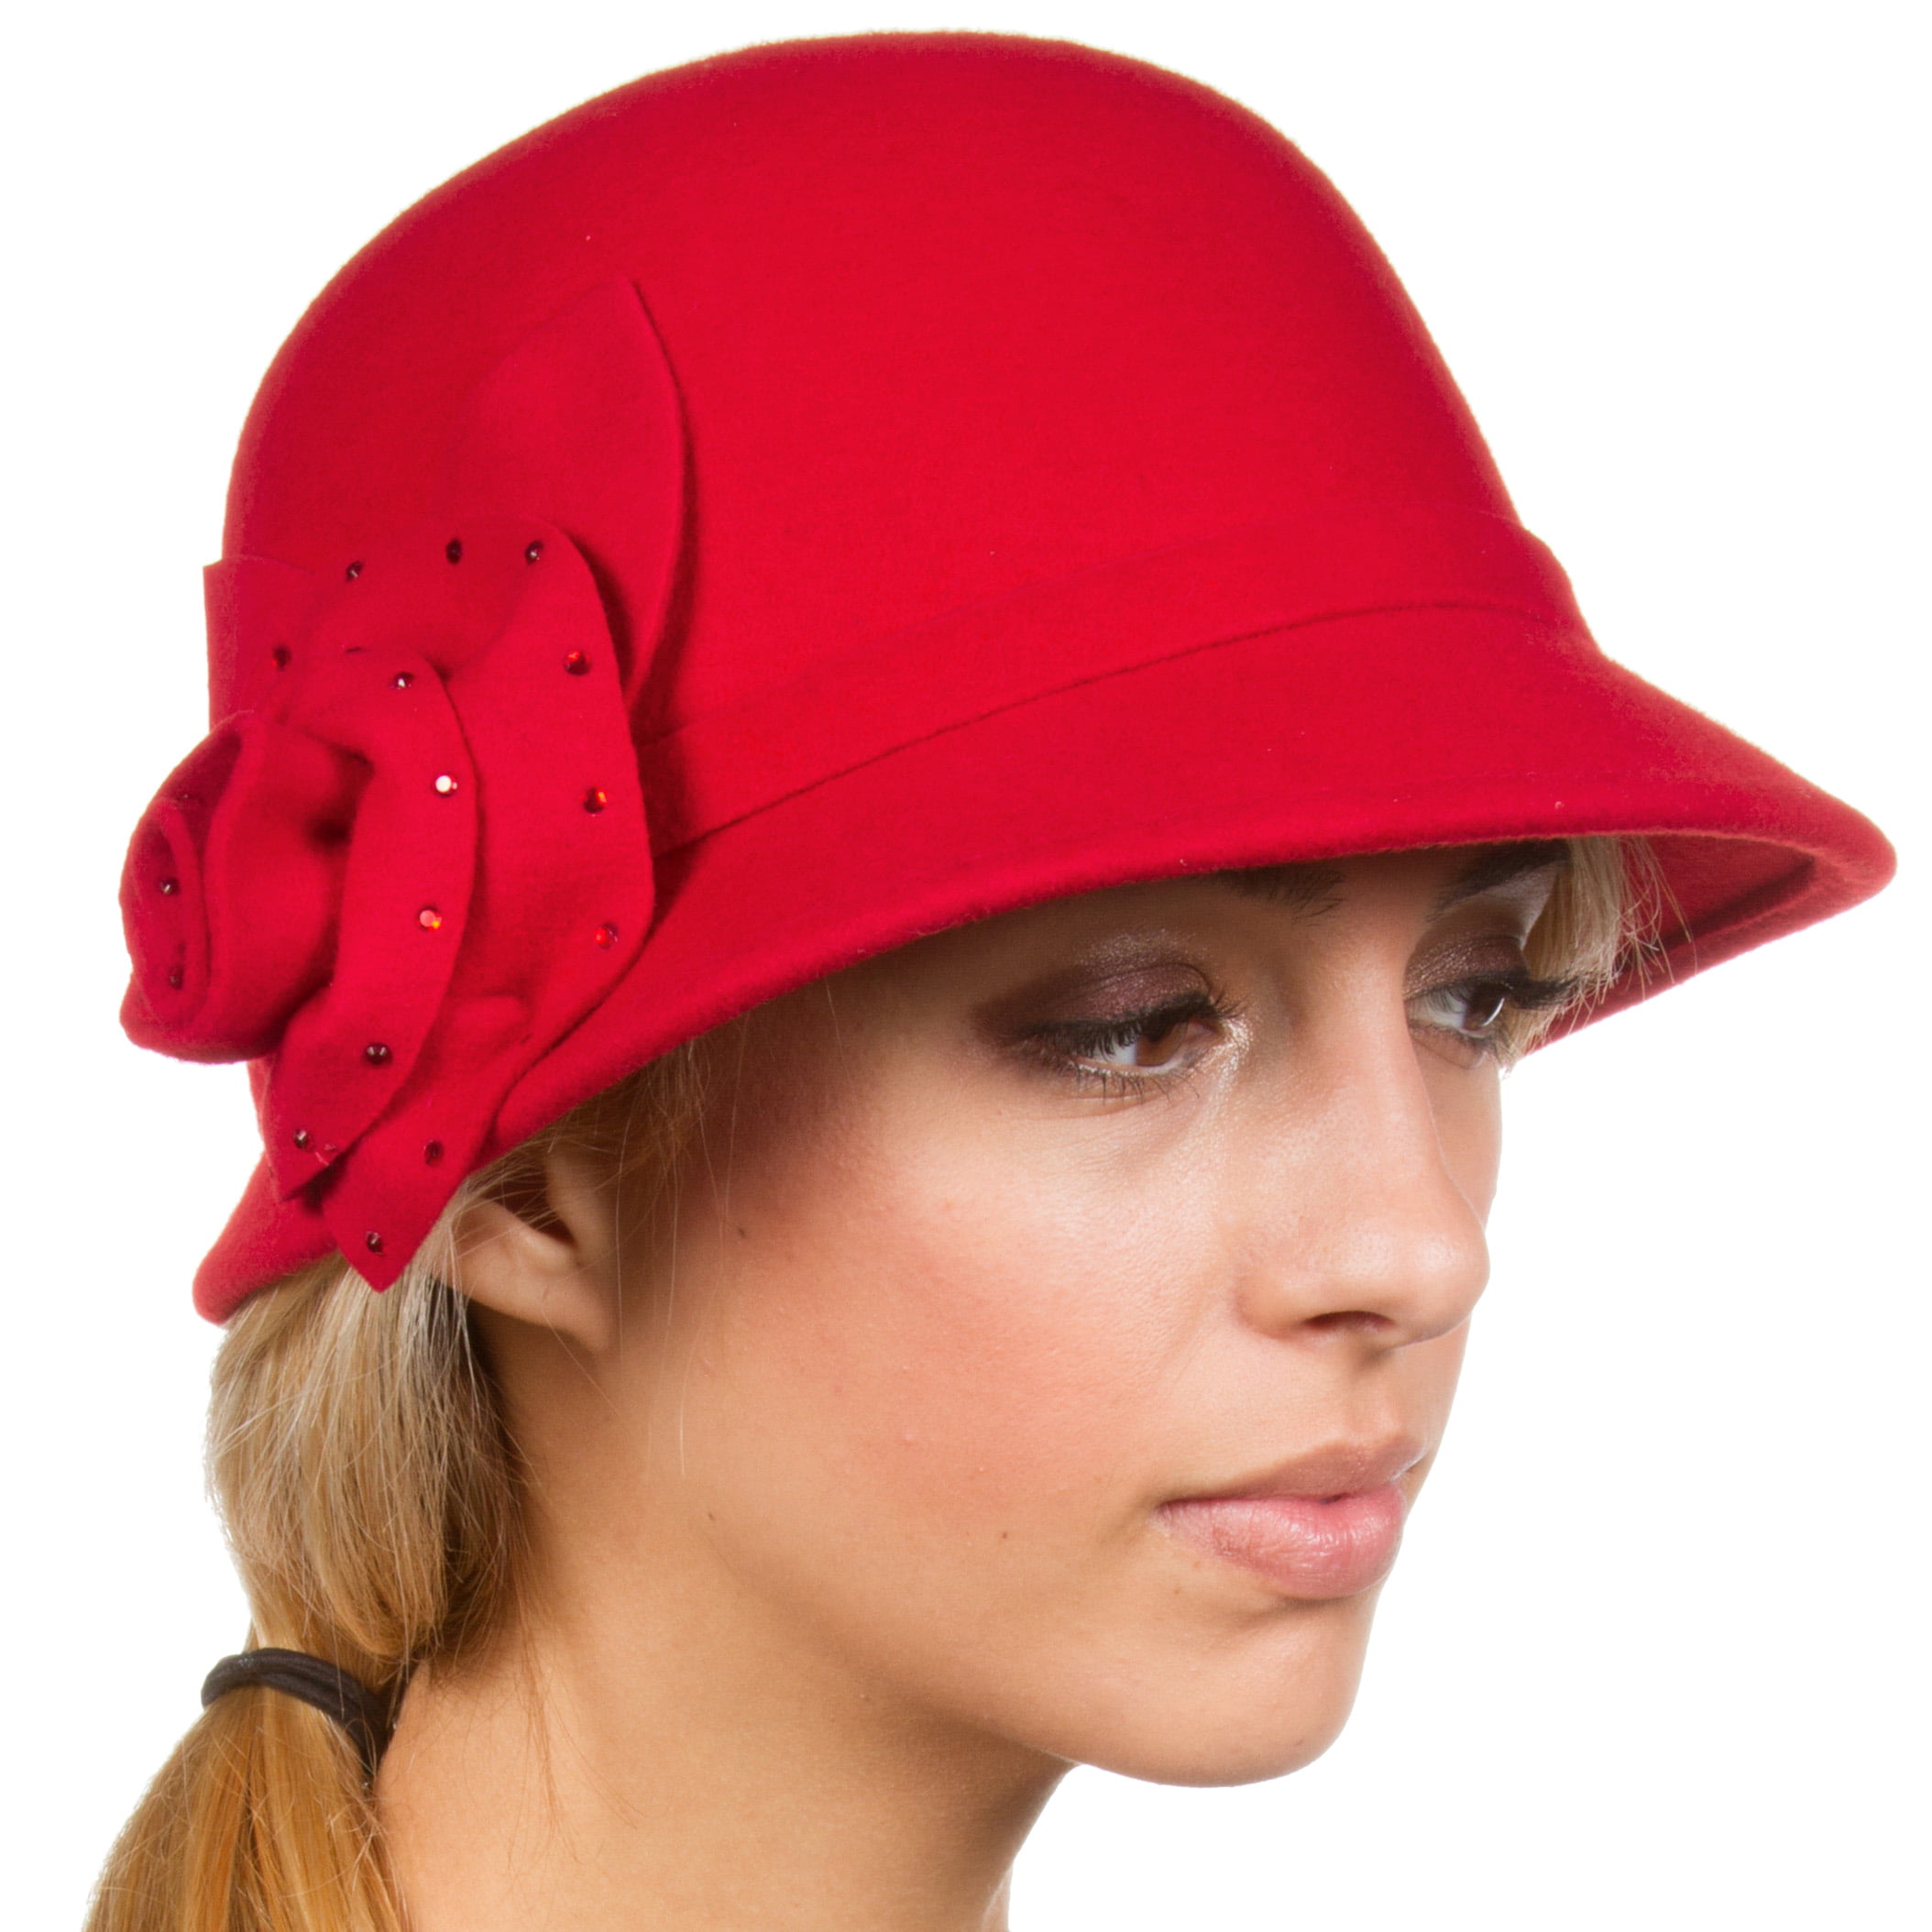 Sakkas Jewel Vintage Style Wool Cloche Bell Hat - Red - One Size ...